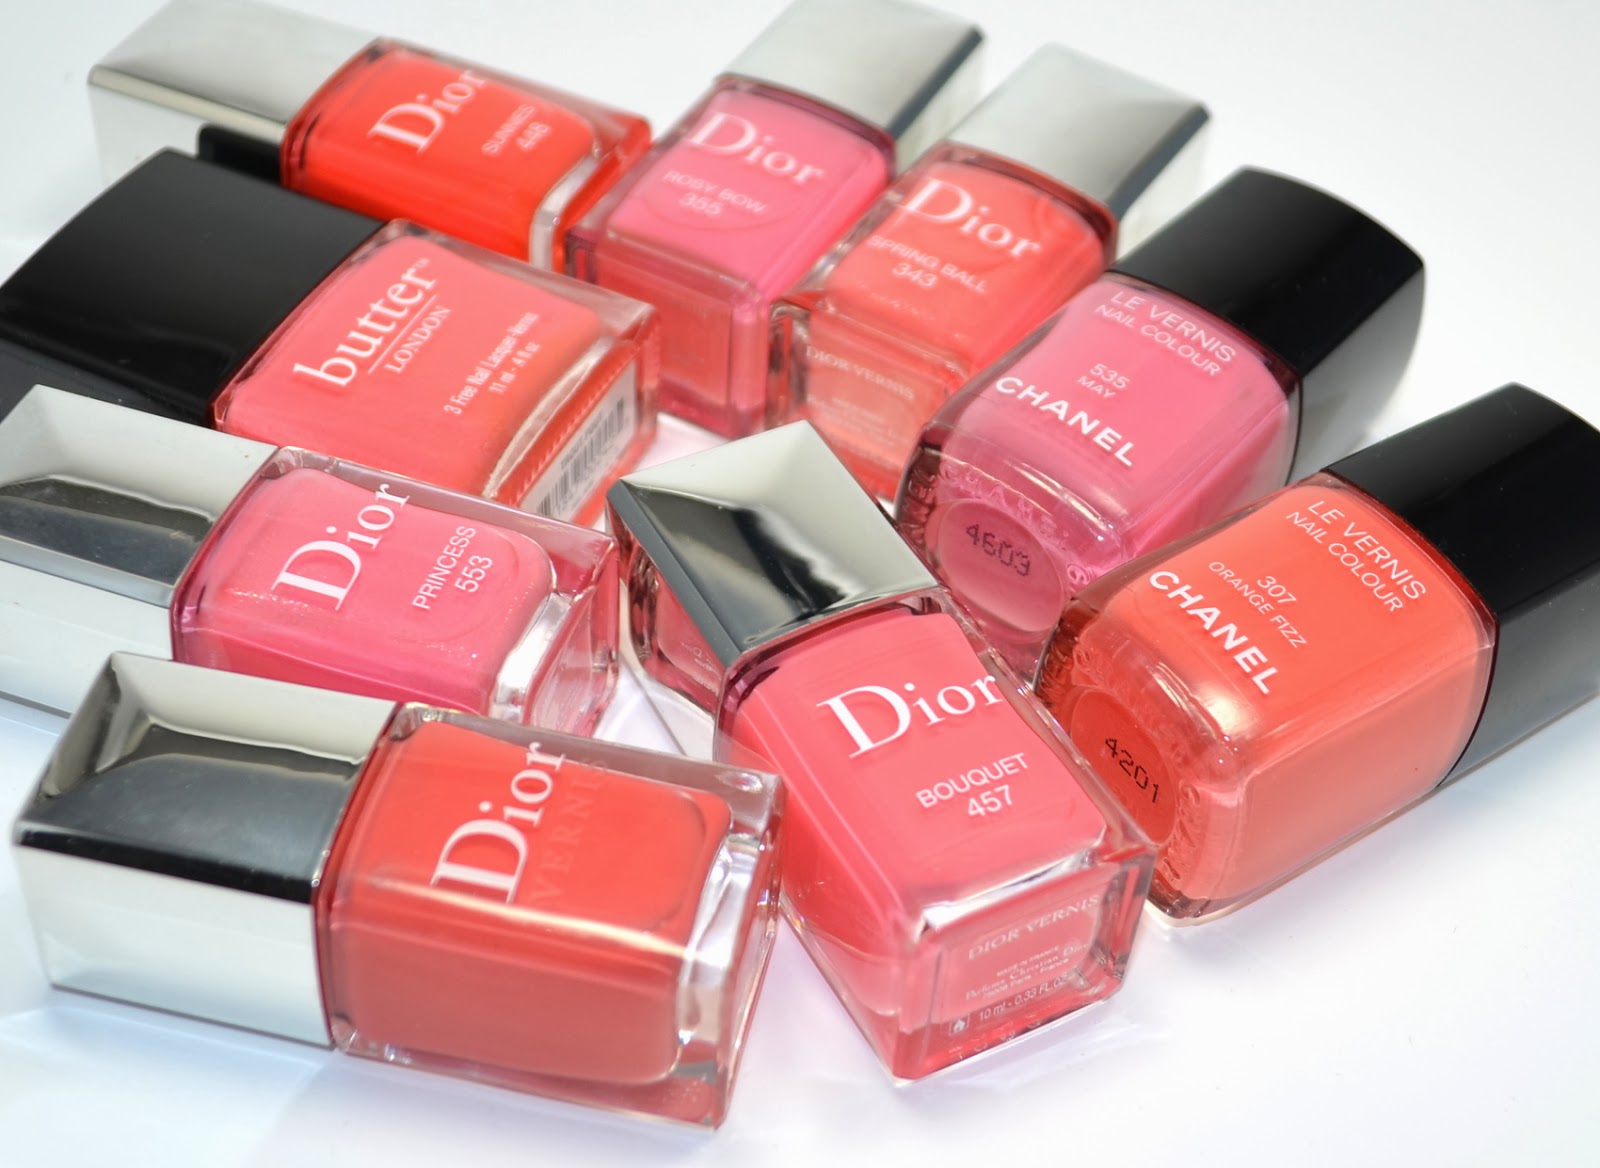 Dior Spring 2014 Nails: Dior Vernis Trianon Edition Swatched and